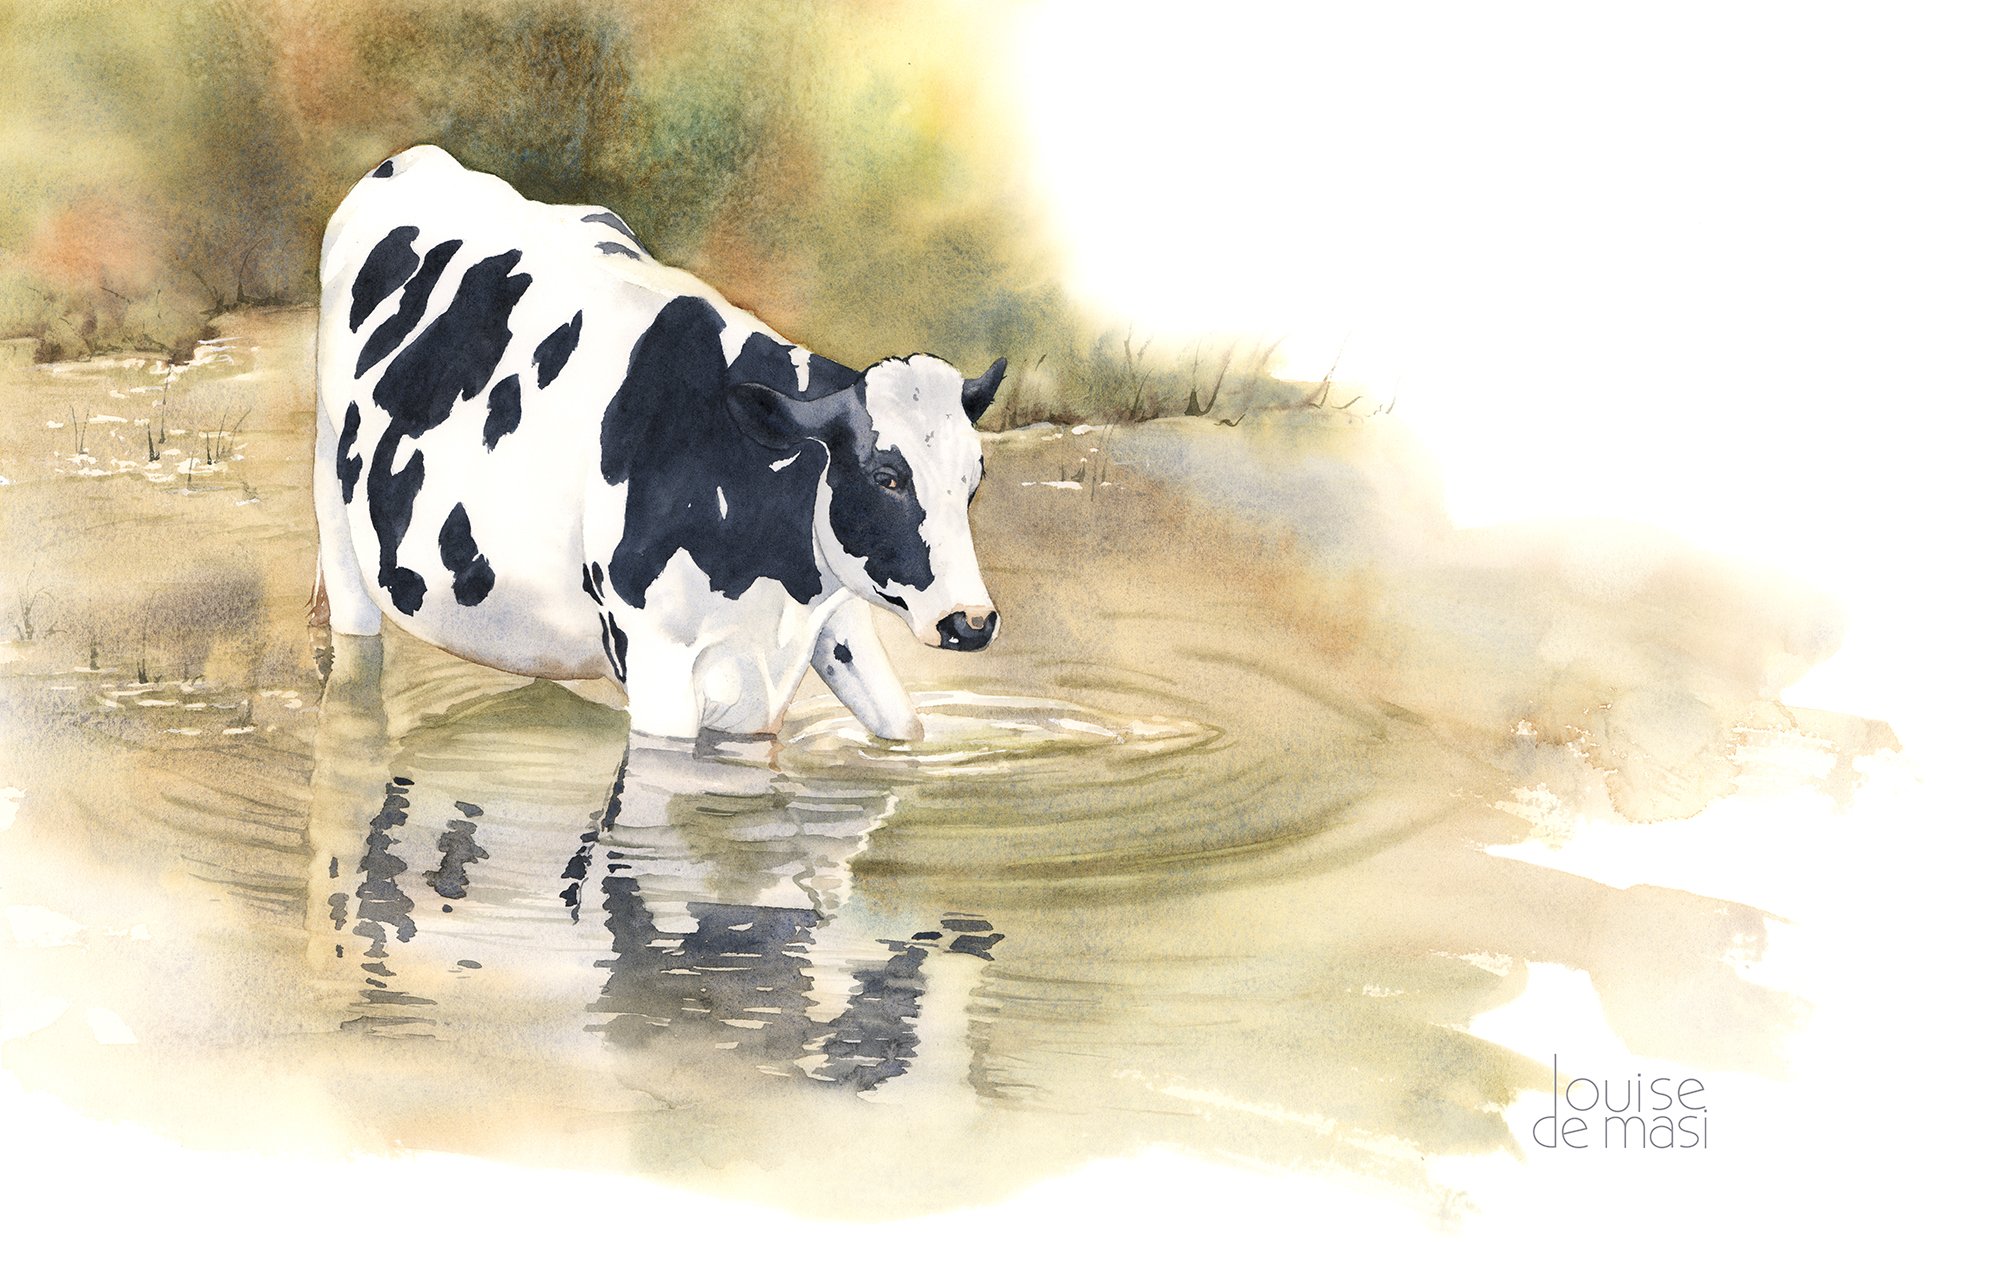 Cow in water - Advanced